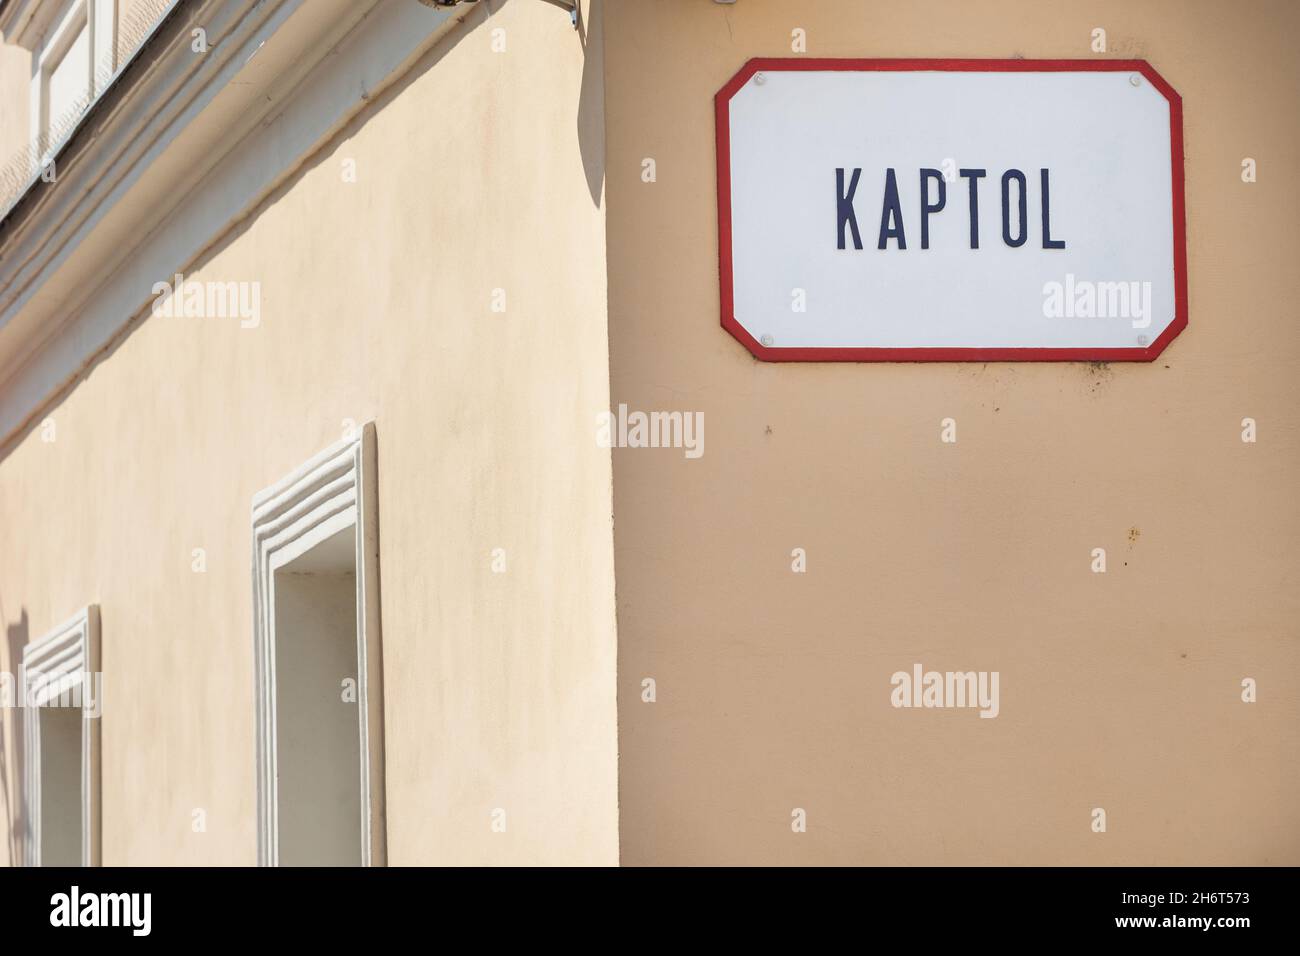 Picture of the street sign Kaptol in Zagreb. Kaptol is a part of Zagreb, Croatia in the Upper Town and it is the seat of the Roman Catholic archbishop Stock Photo